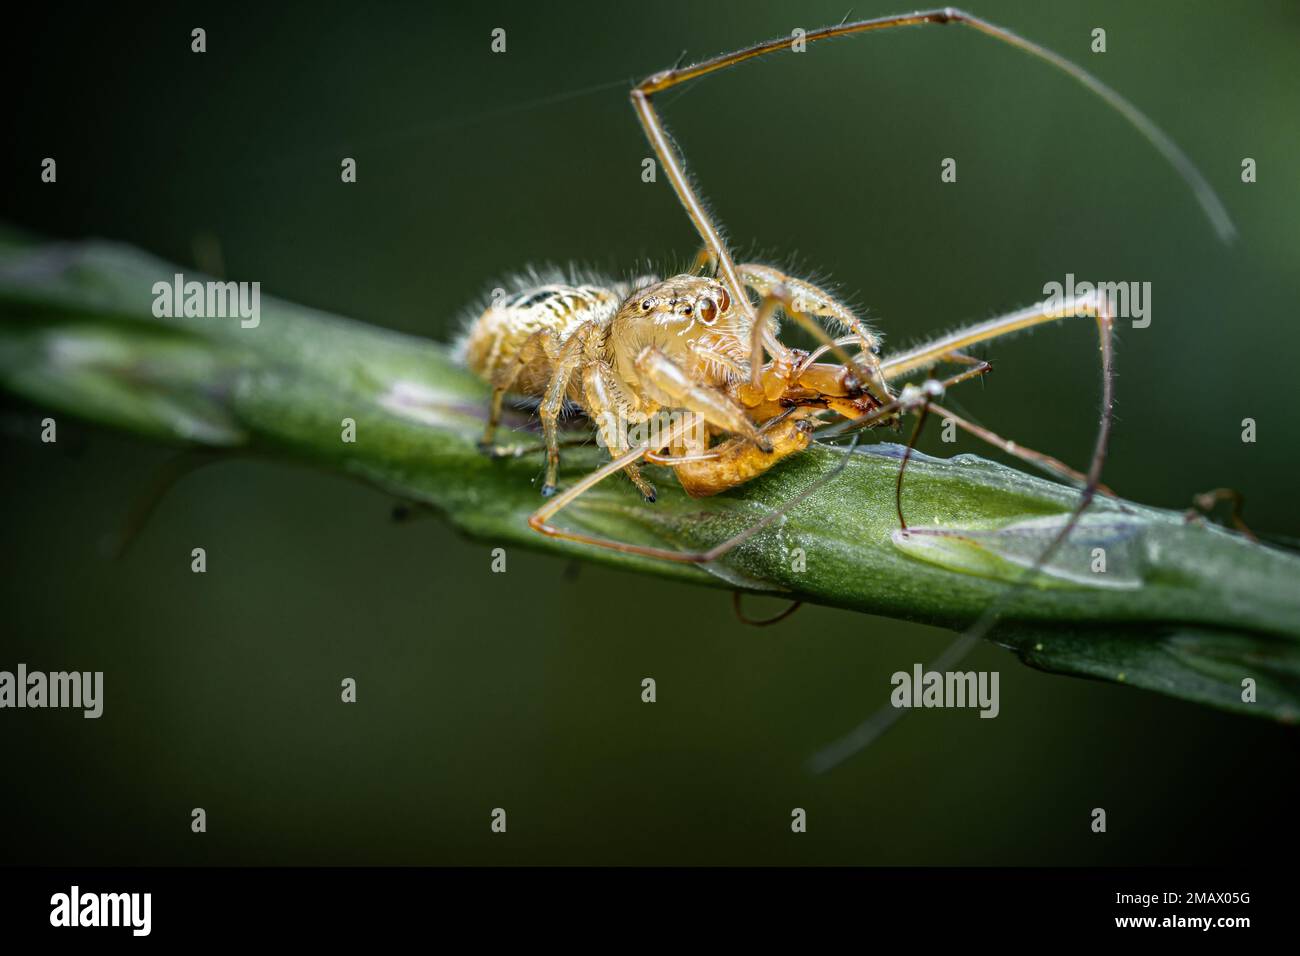 Jumping spider eating prey on green Stachytarpheta jamaicensis tree, Jumping spider and Lynx spider, Selective focus, Macro shot, Natural background, Stock Photo